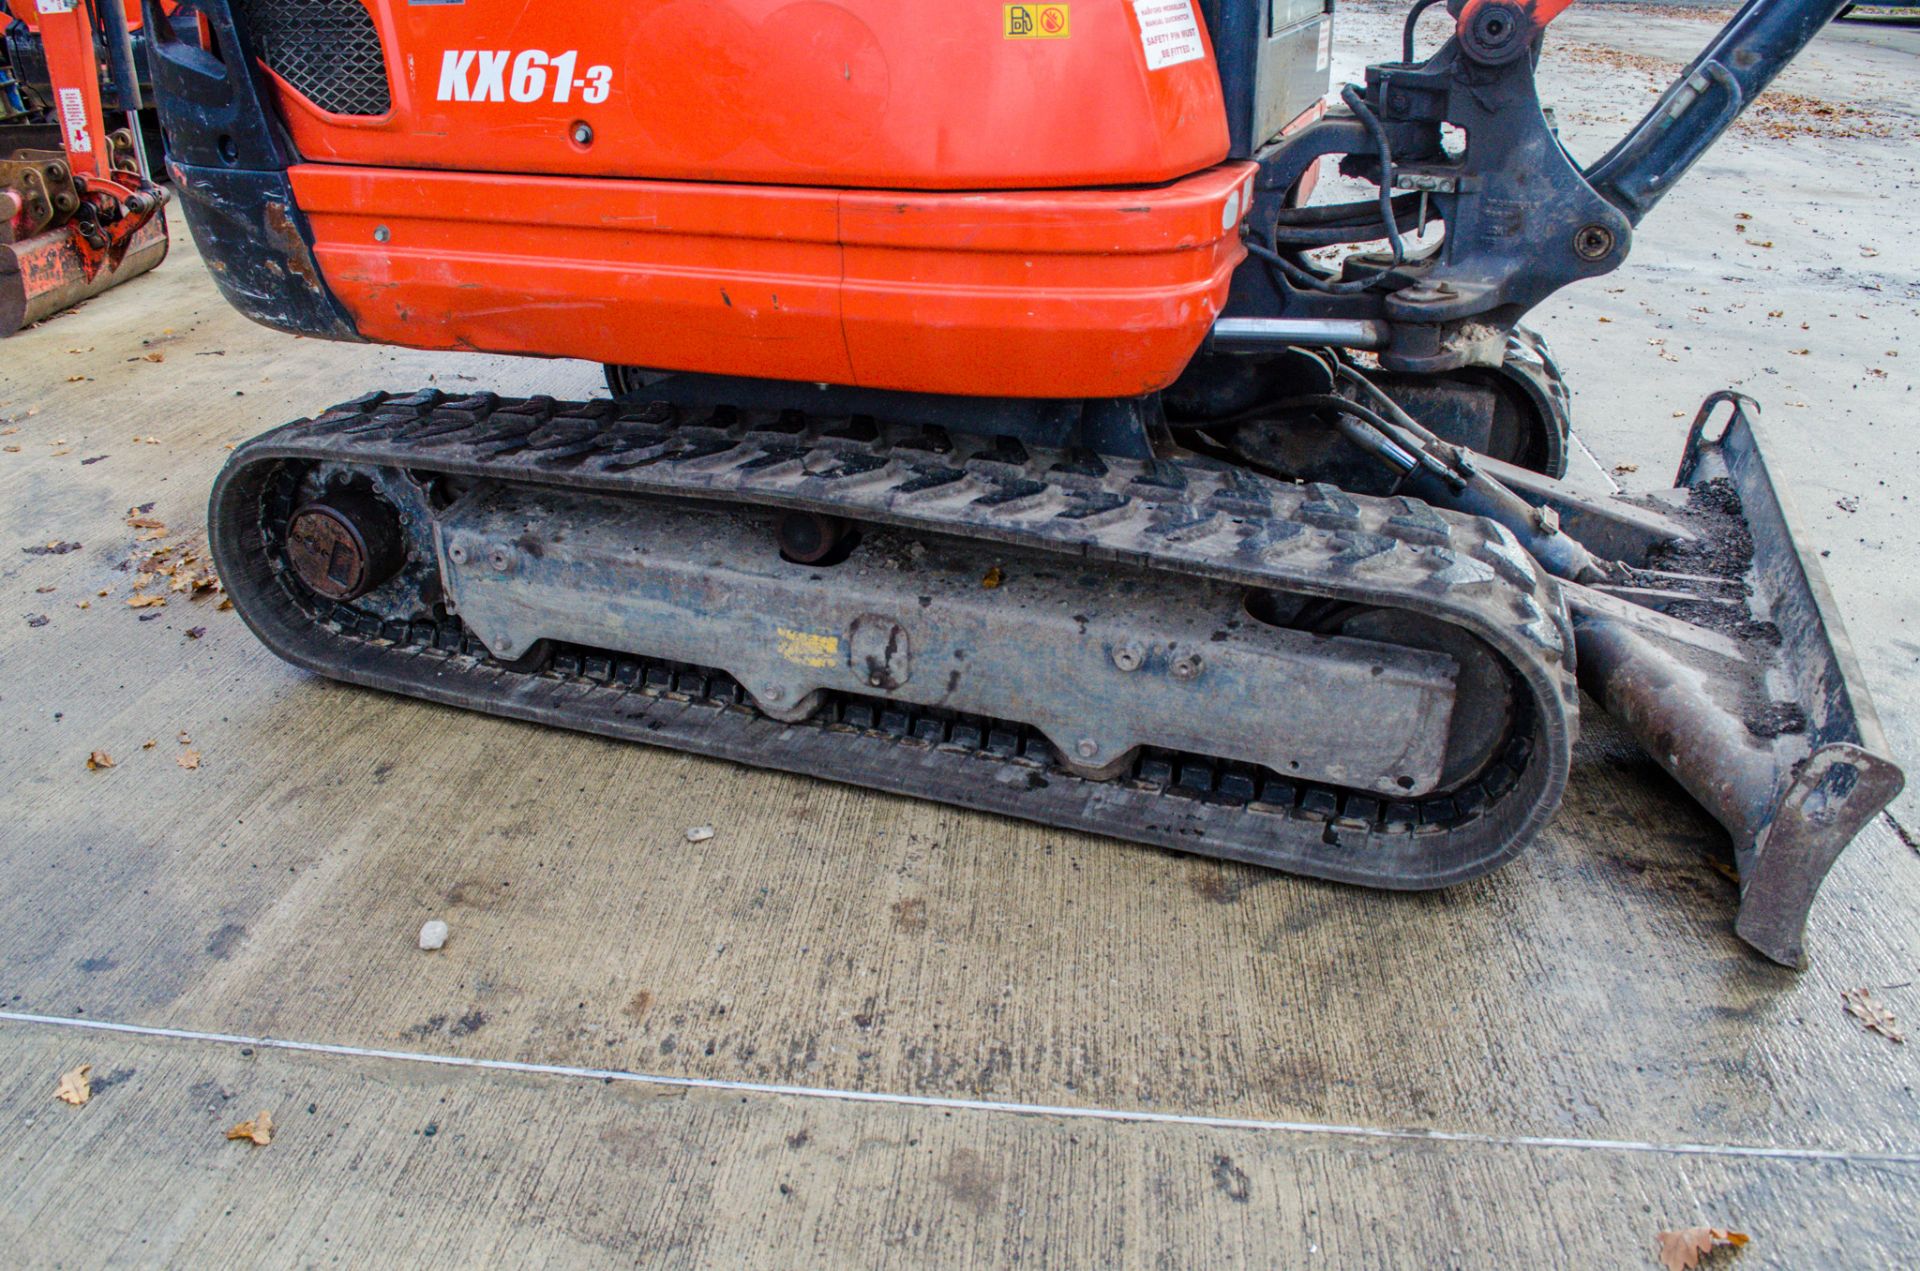 Kubota KX61-3 2.6 tonne rubber tracked excavator Year: 2015 S/N: 81787 Recorded Hours: 2860 EXC149 - Image 8 of 18